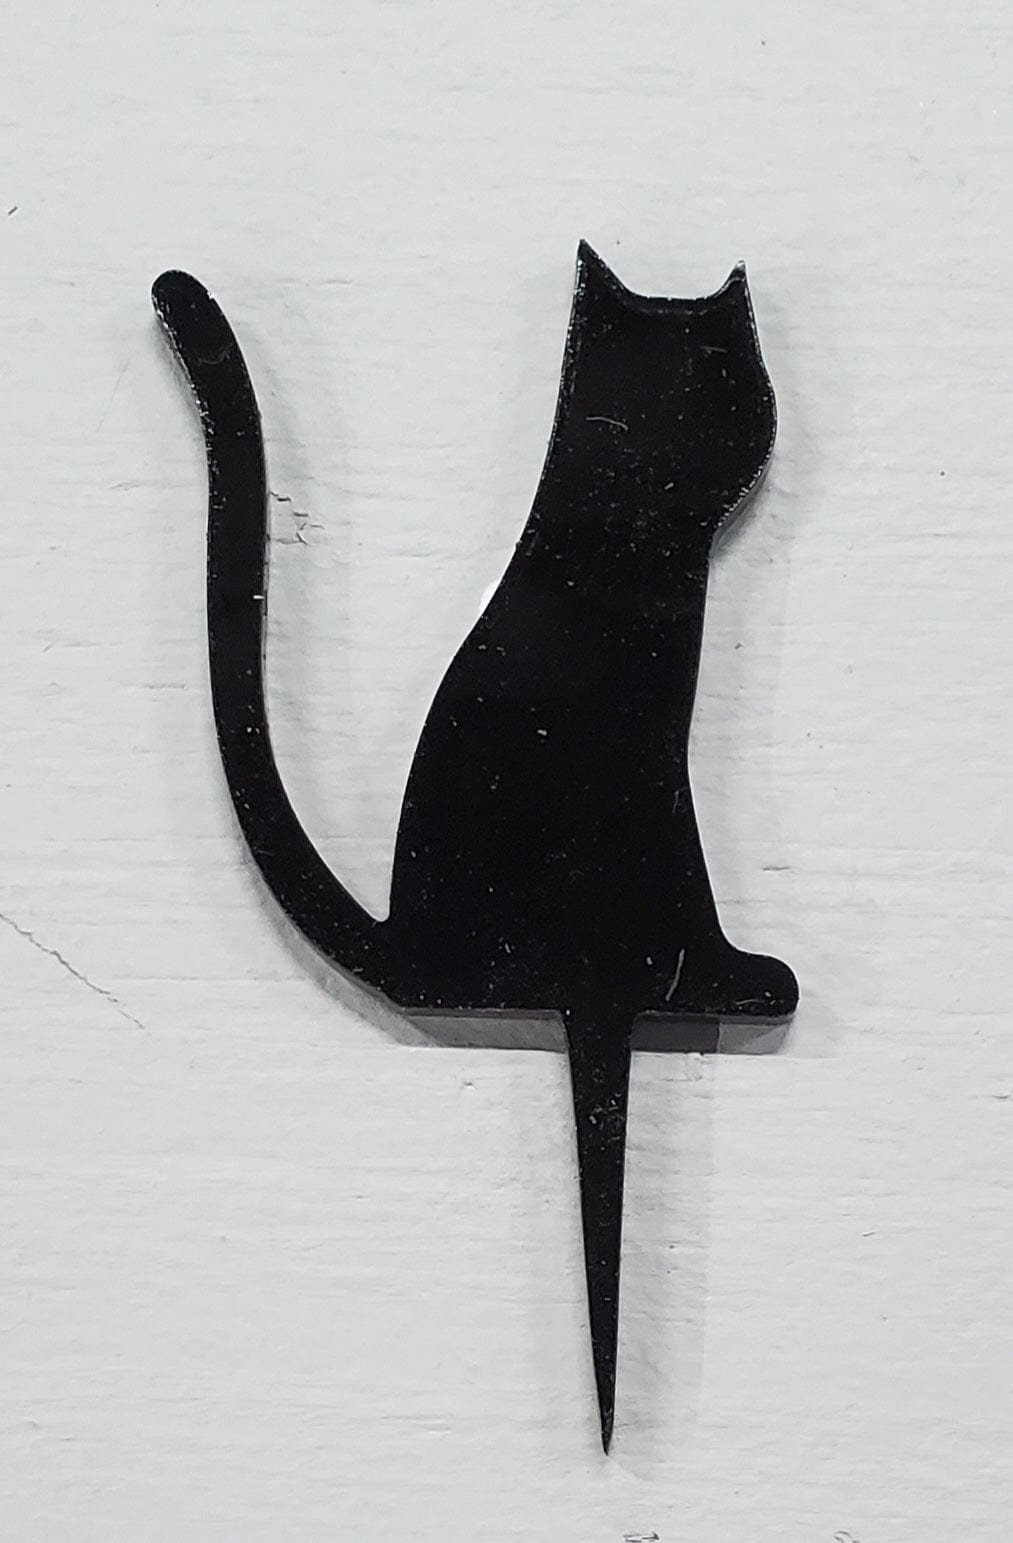 Urban Sprouts Production Prop Black Cat Tall Sitting Mini Plant Signs - Cats